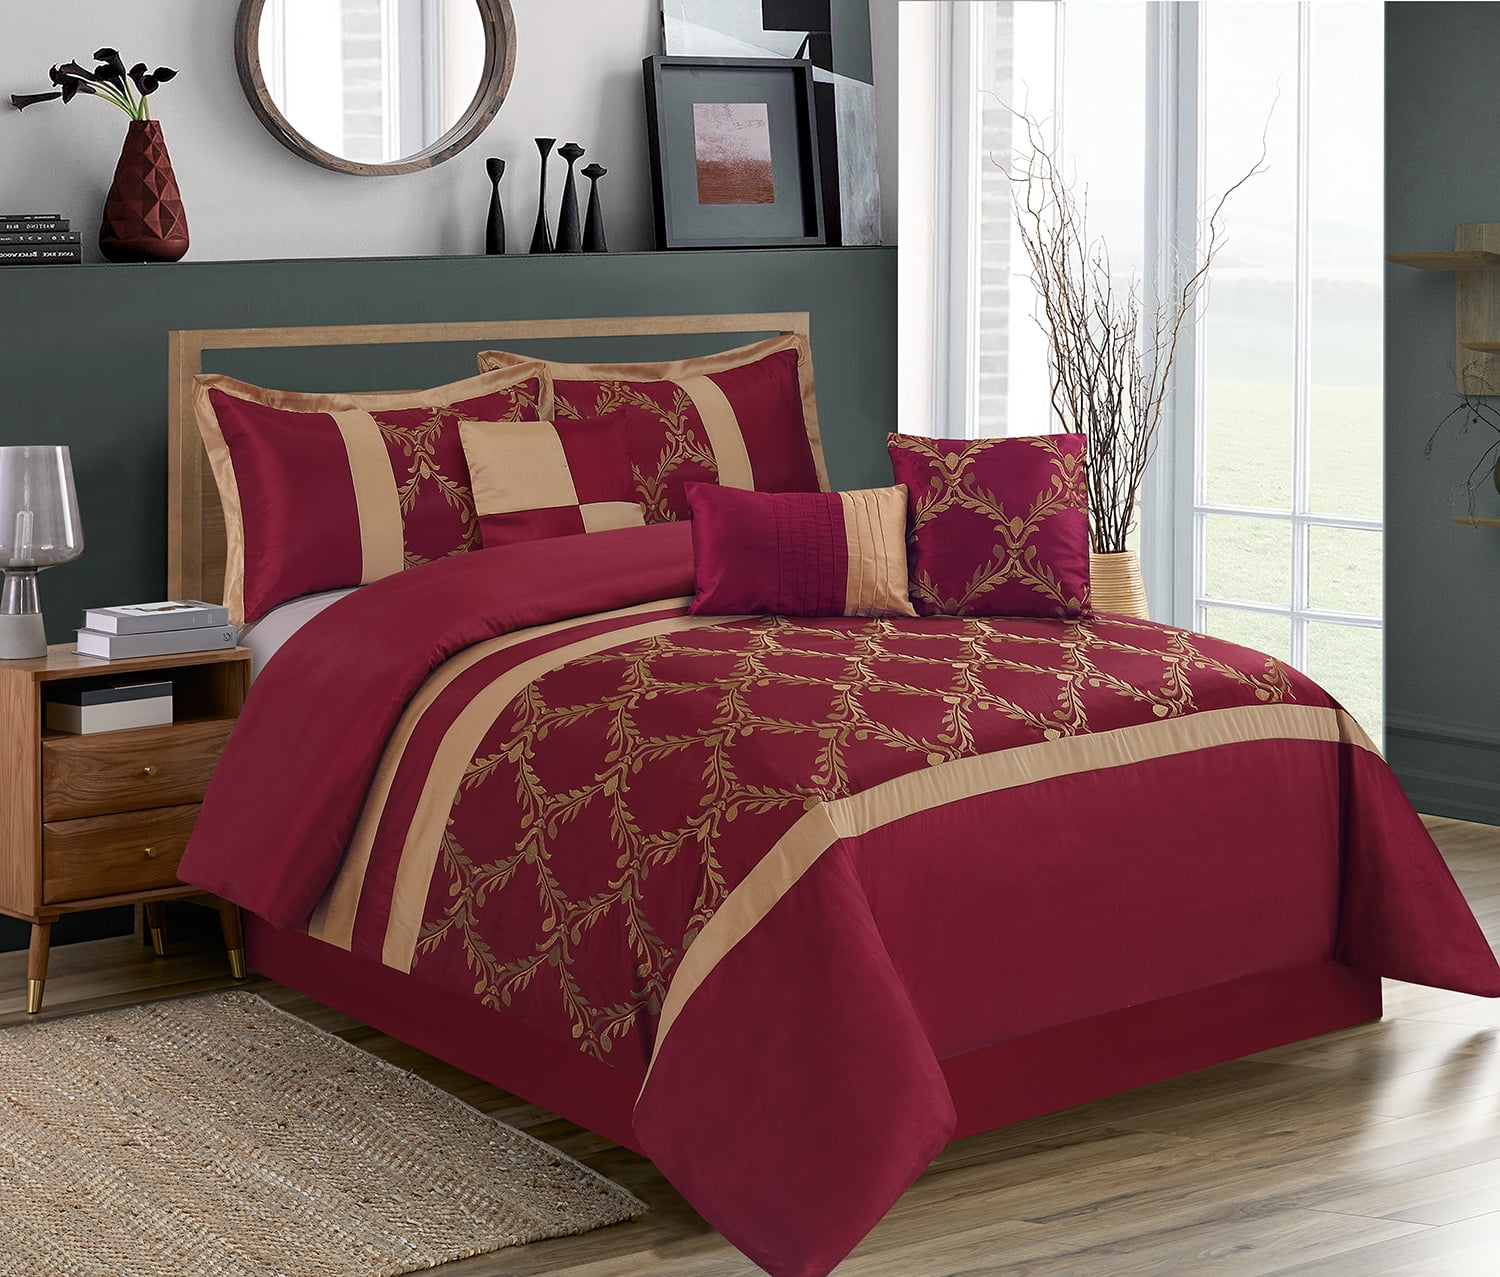 Luxurious Silky Black Burgundy Floral Jacquard 7 pc Cal King Queen Comforter Set 